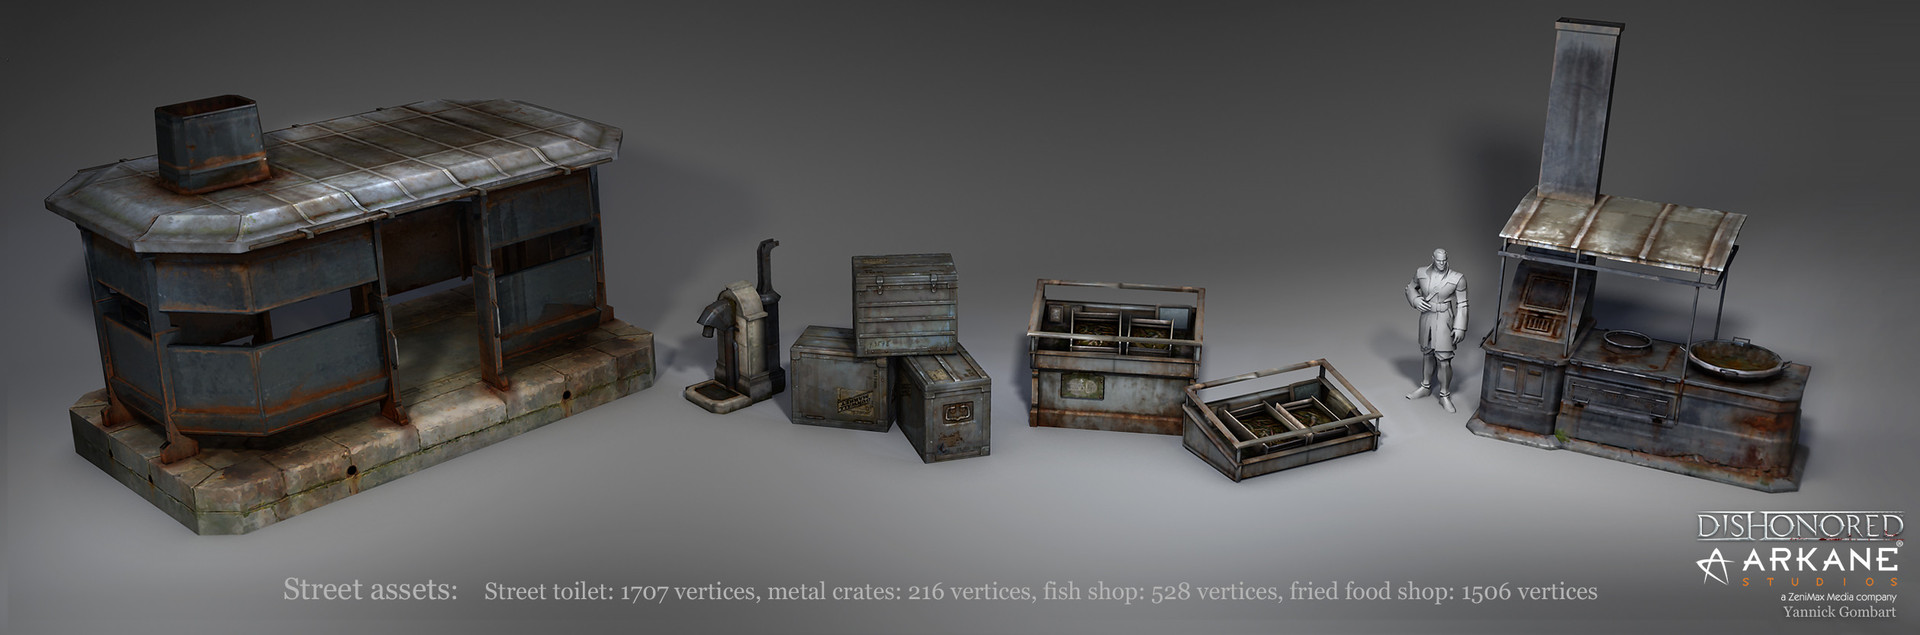 dishonored 1 concept art in modo software